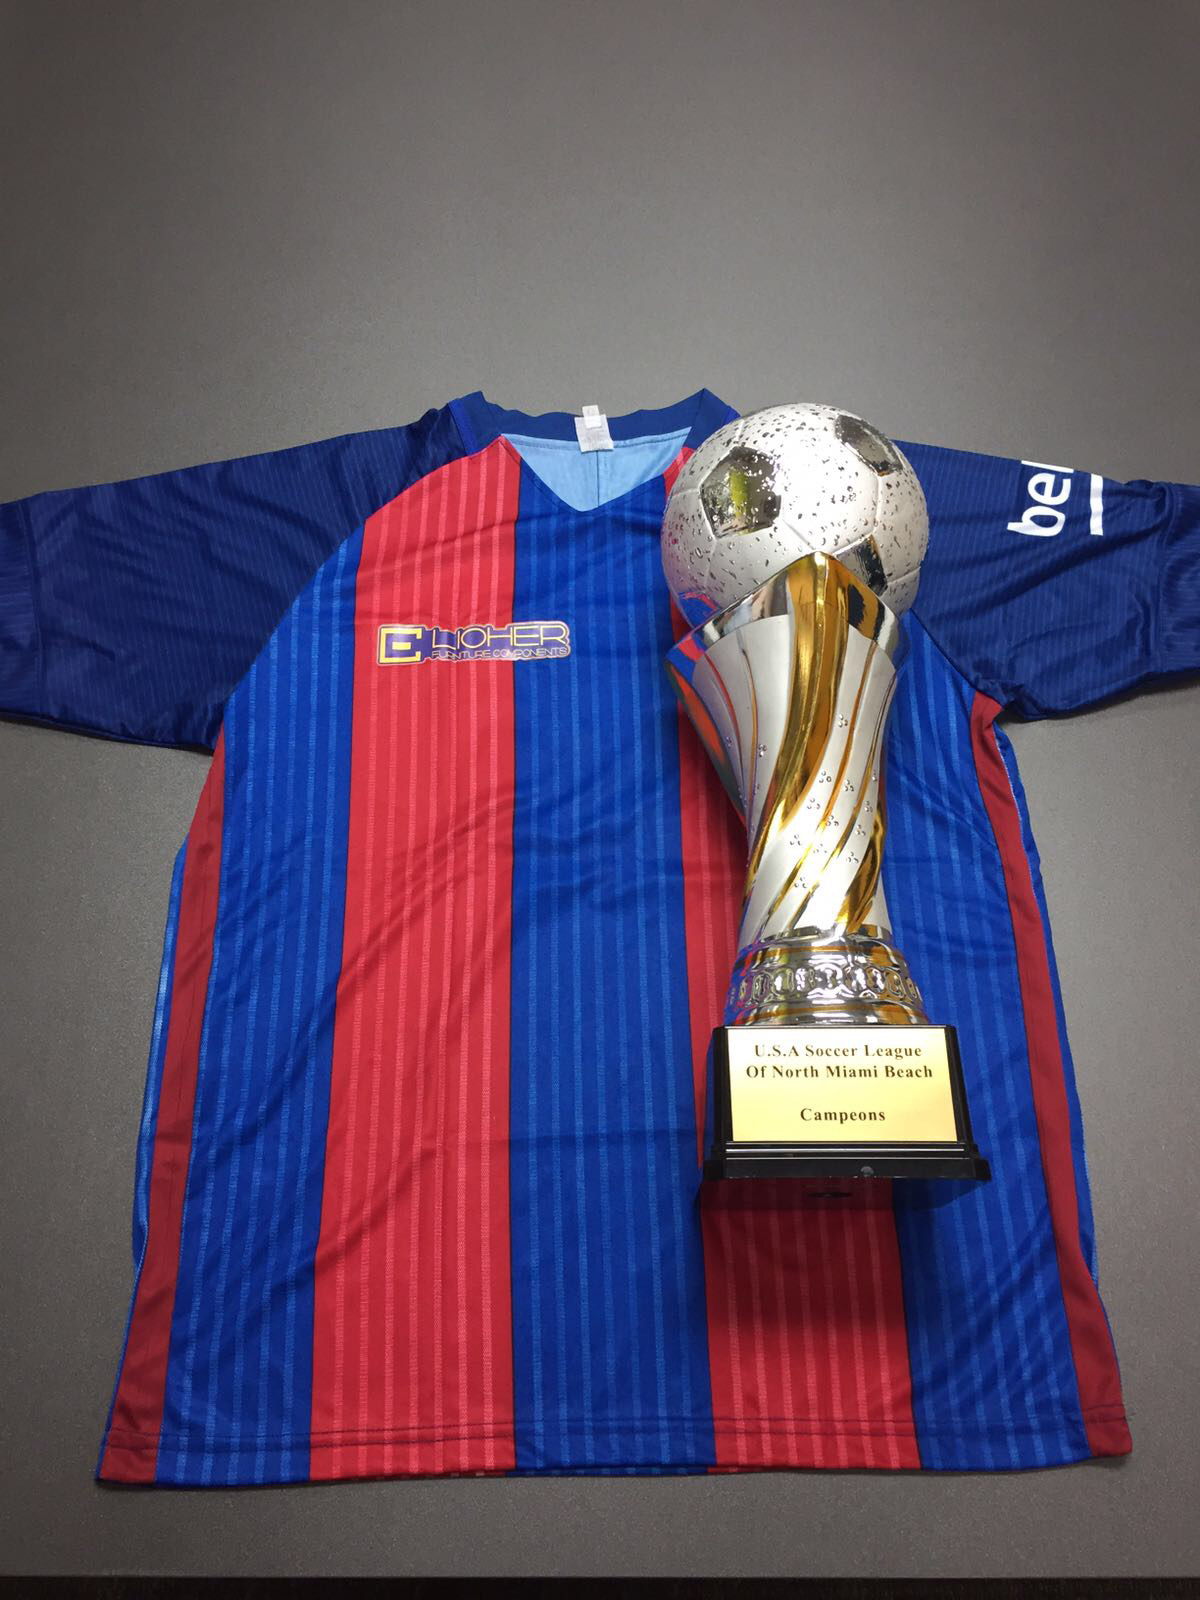 Lioher camiseta-y-copa RECOGNITION WHILE GIVING BACK TO OUR COMUNITY  